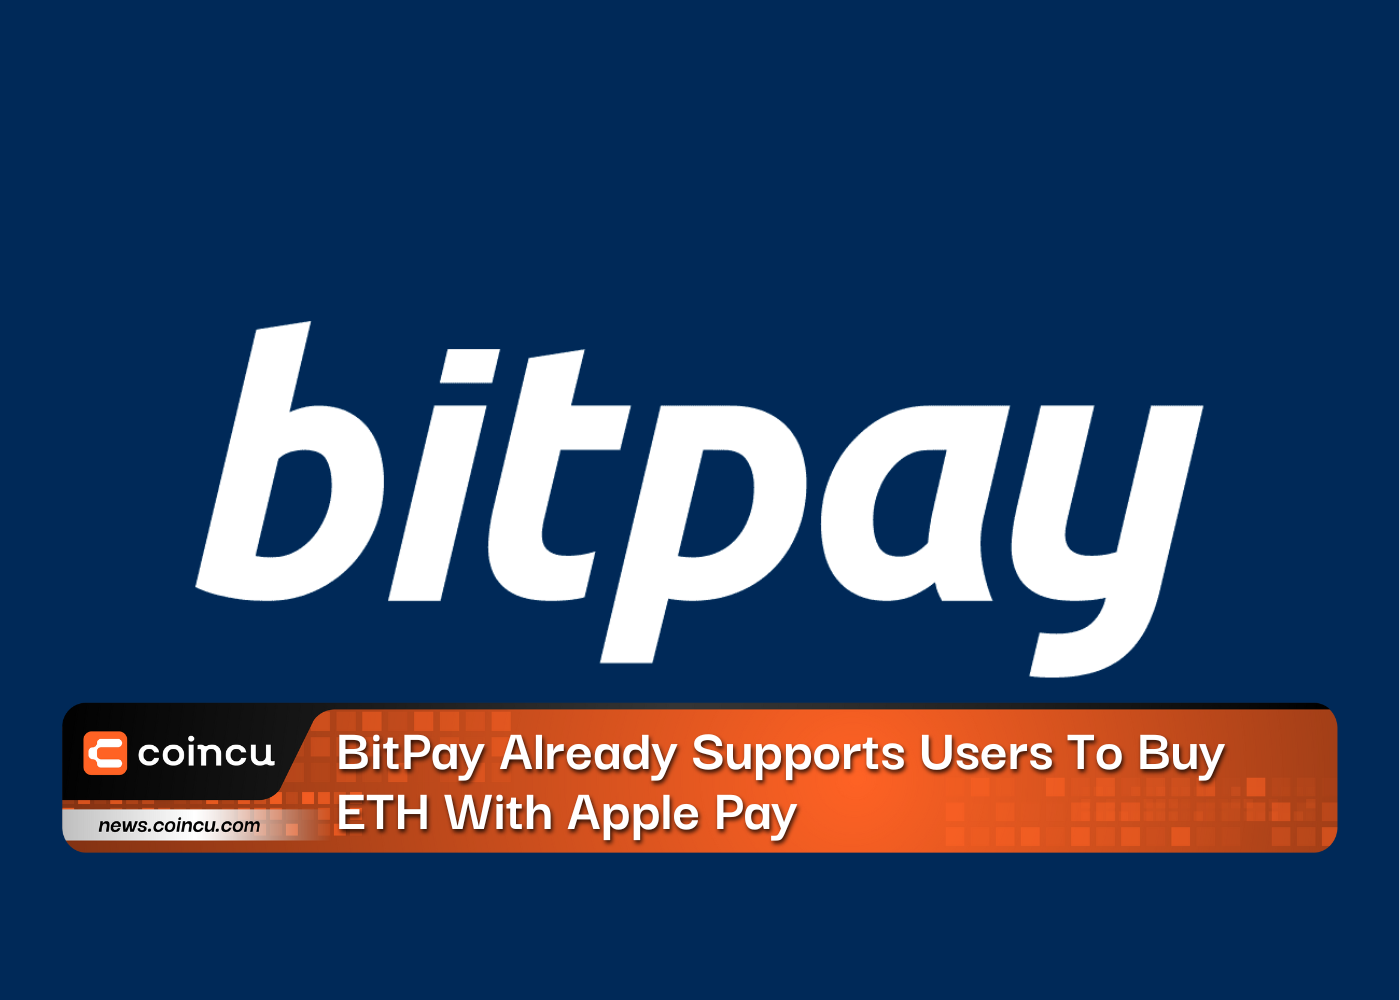 BitPay Already Supports Users To Buy ETH With Apple Pay